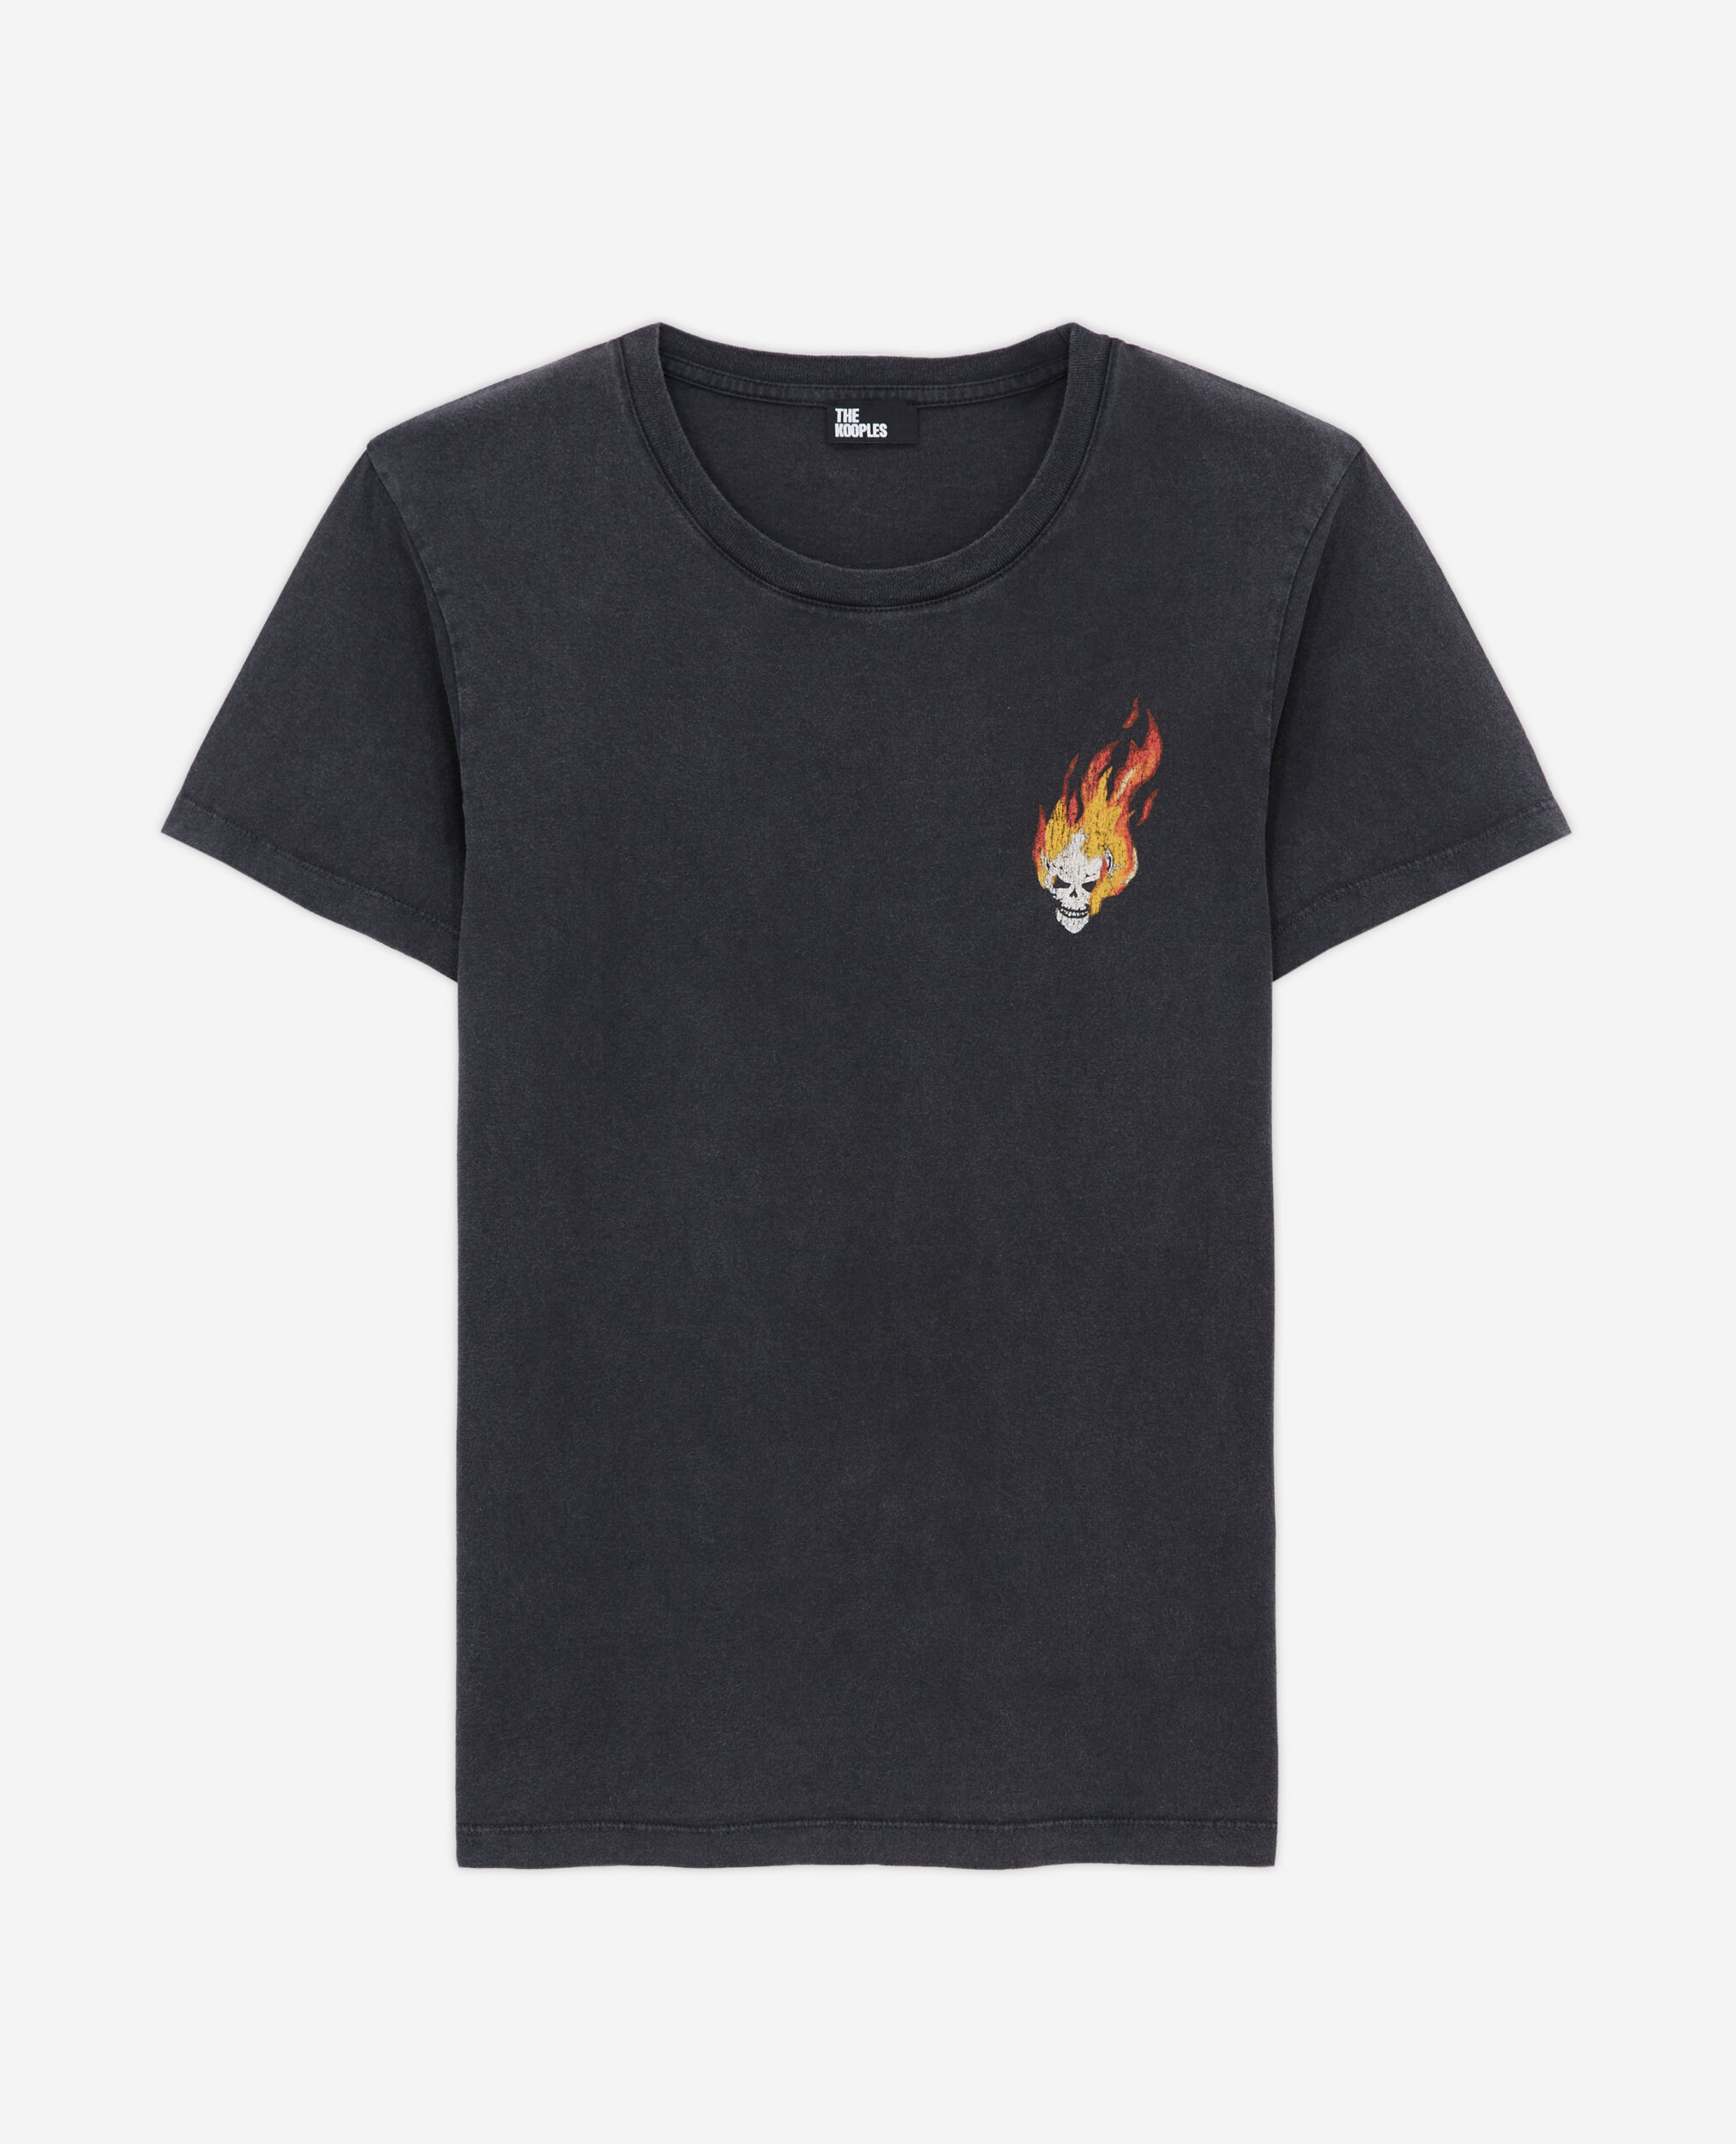 Women's black t-shirt with skull on fire print, BLACK WASHED, hi-res image number null